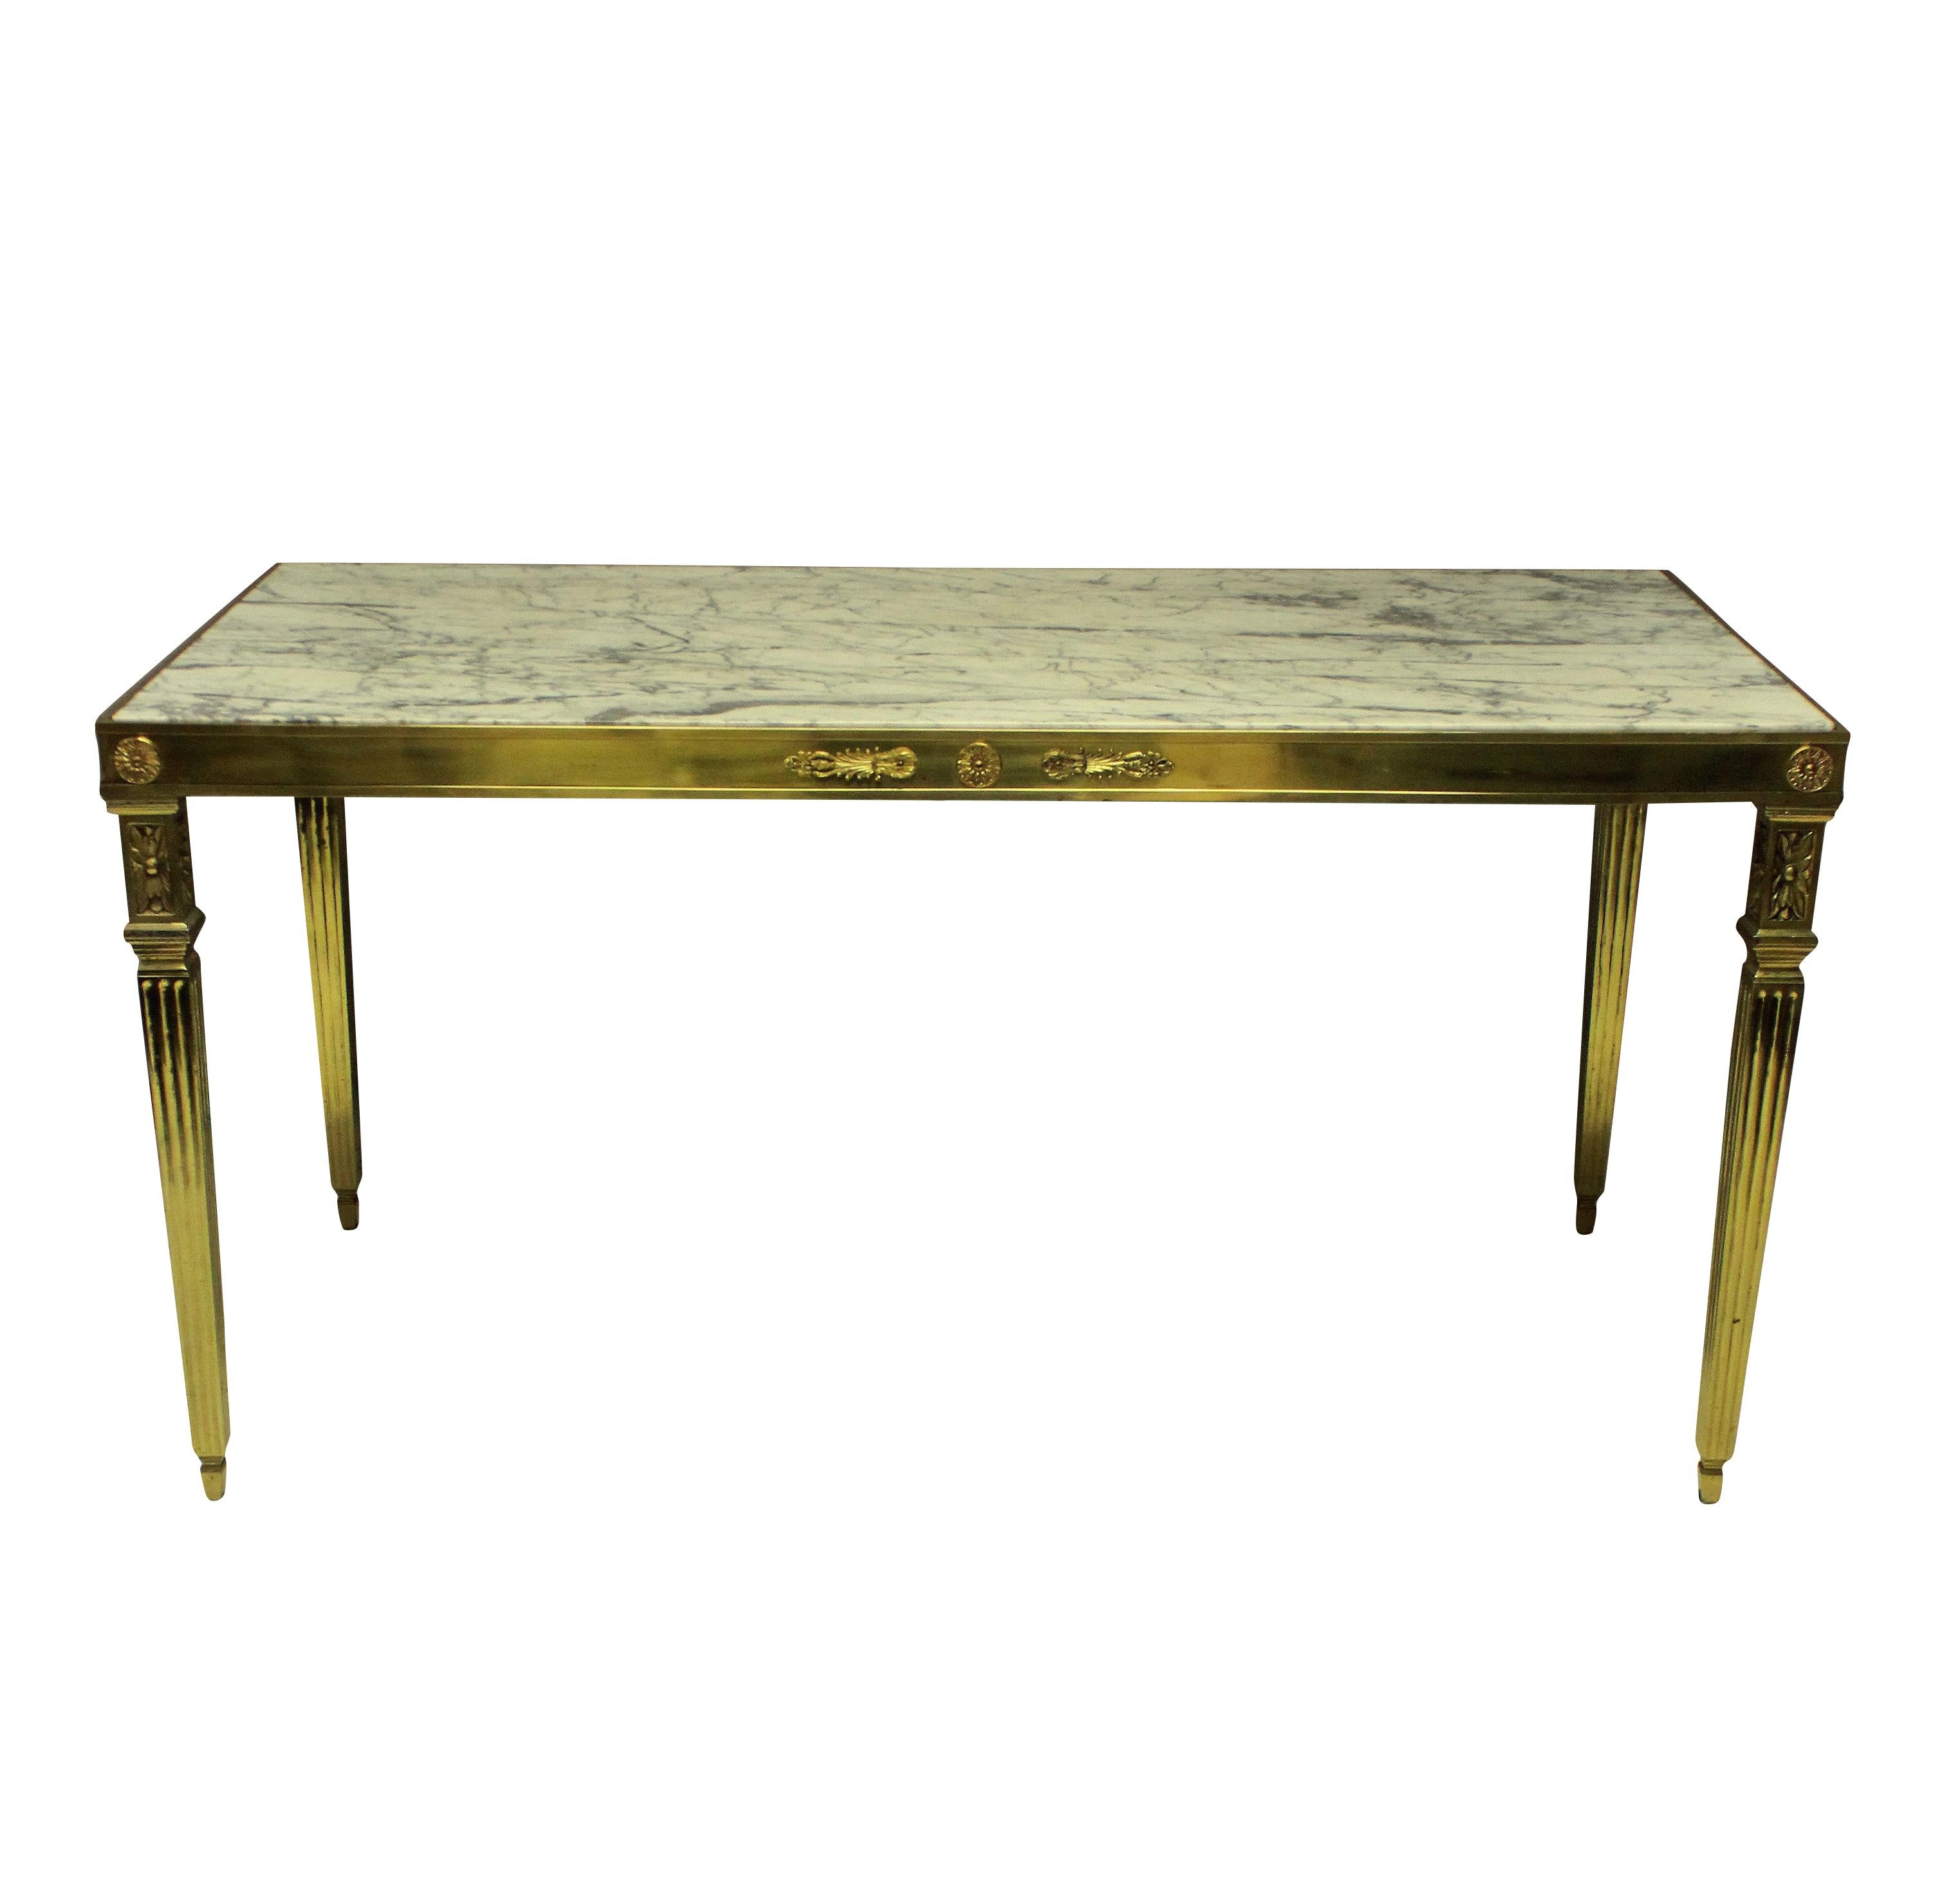 A fine Italian gilt bronze neoclassical hall table, with acanthus decoration around each frieze and on square tapering fluted legs. With an inset grey and off white marble top.